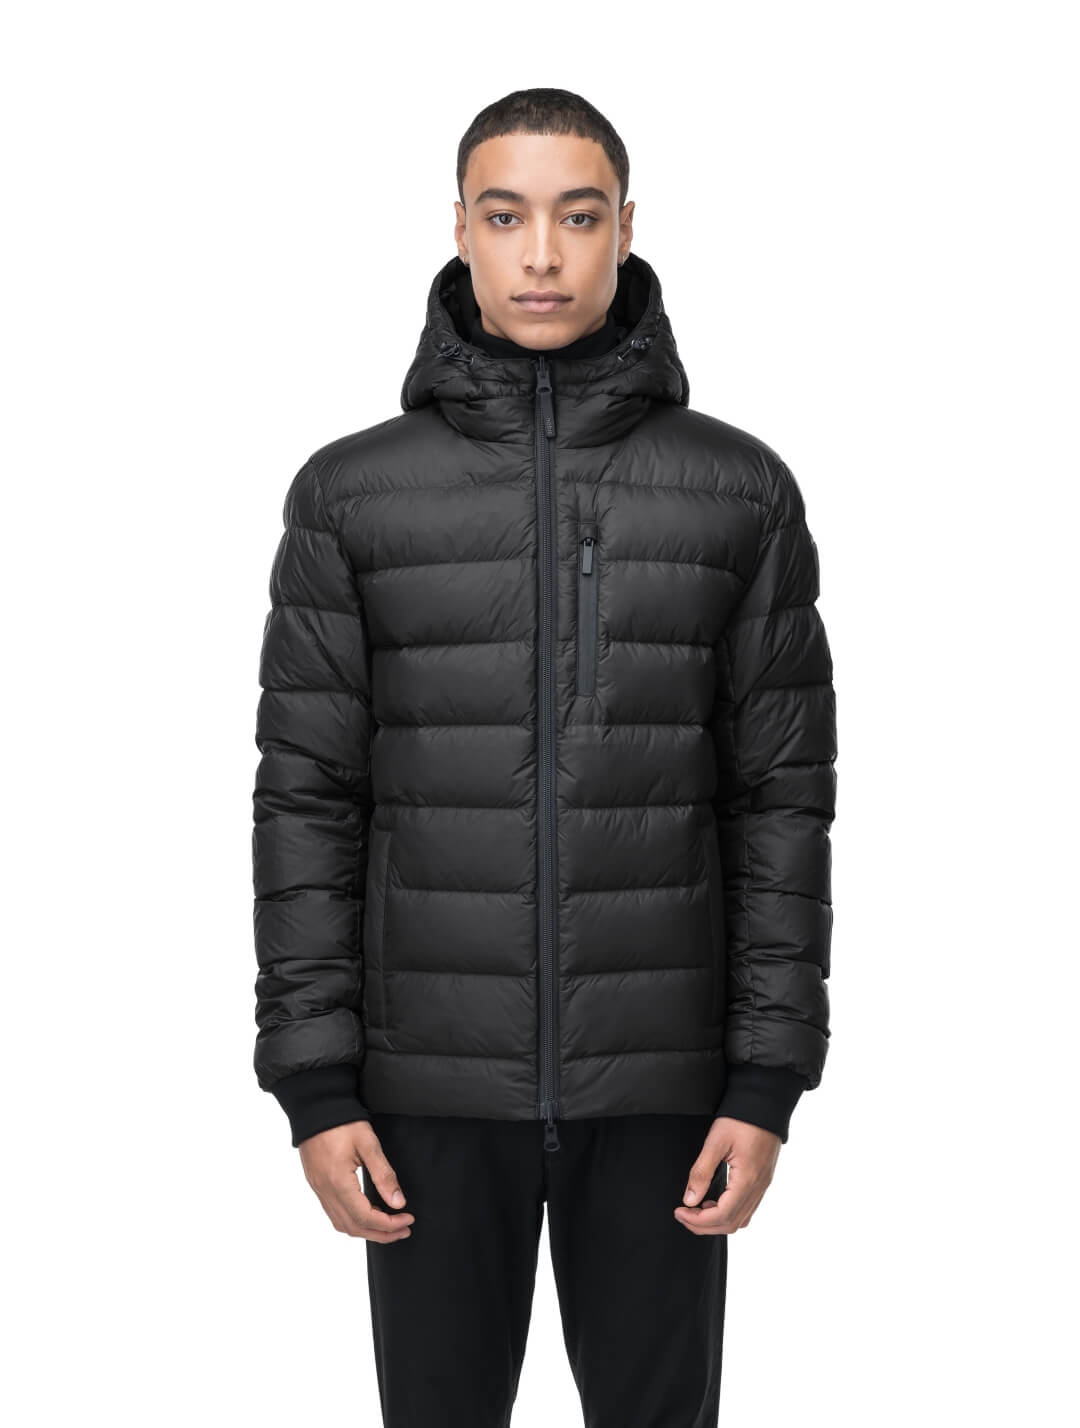 Chris Men's Mid Weight Reversible Puffer Jacket in hip length, Canadian duck down insulation, non-removable adjustable hood, ribbed cuffs, and quilted body on reversible side, in Black